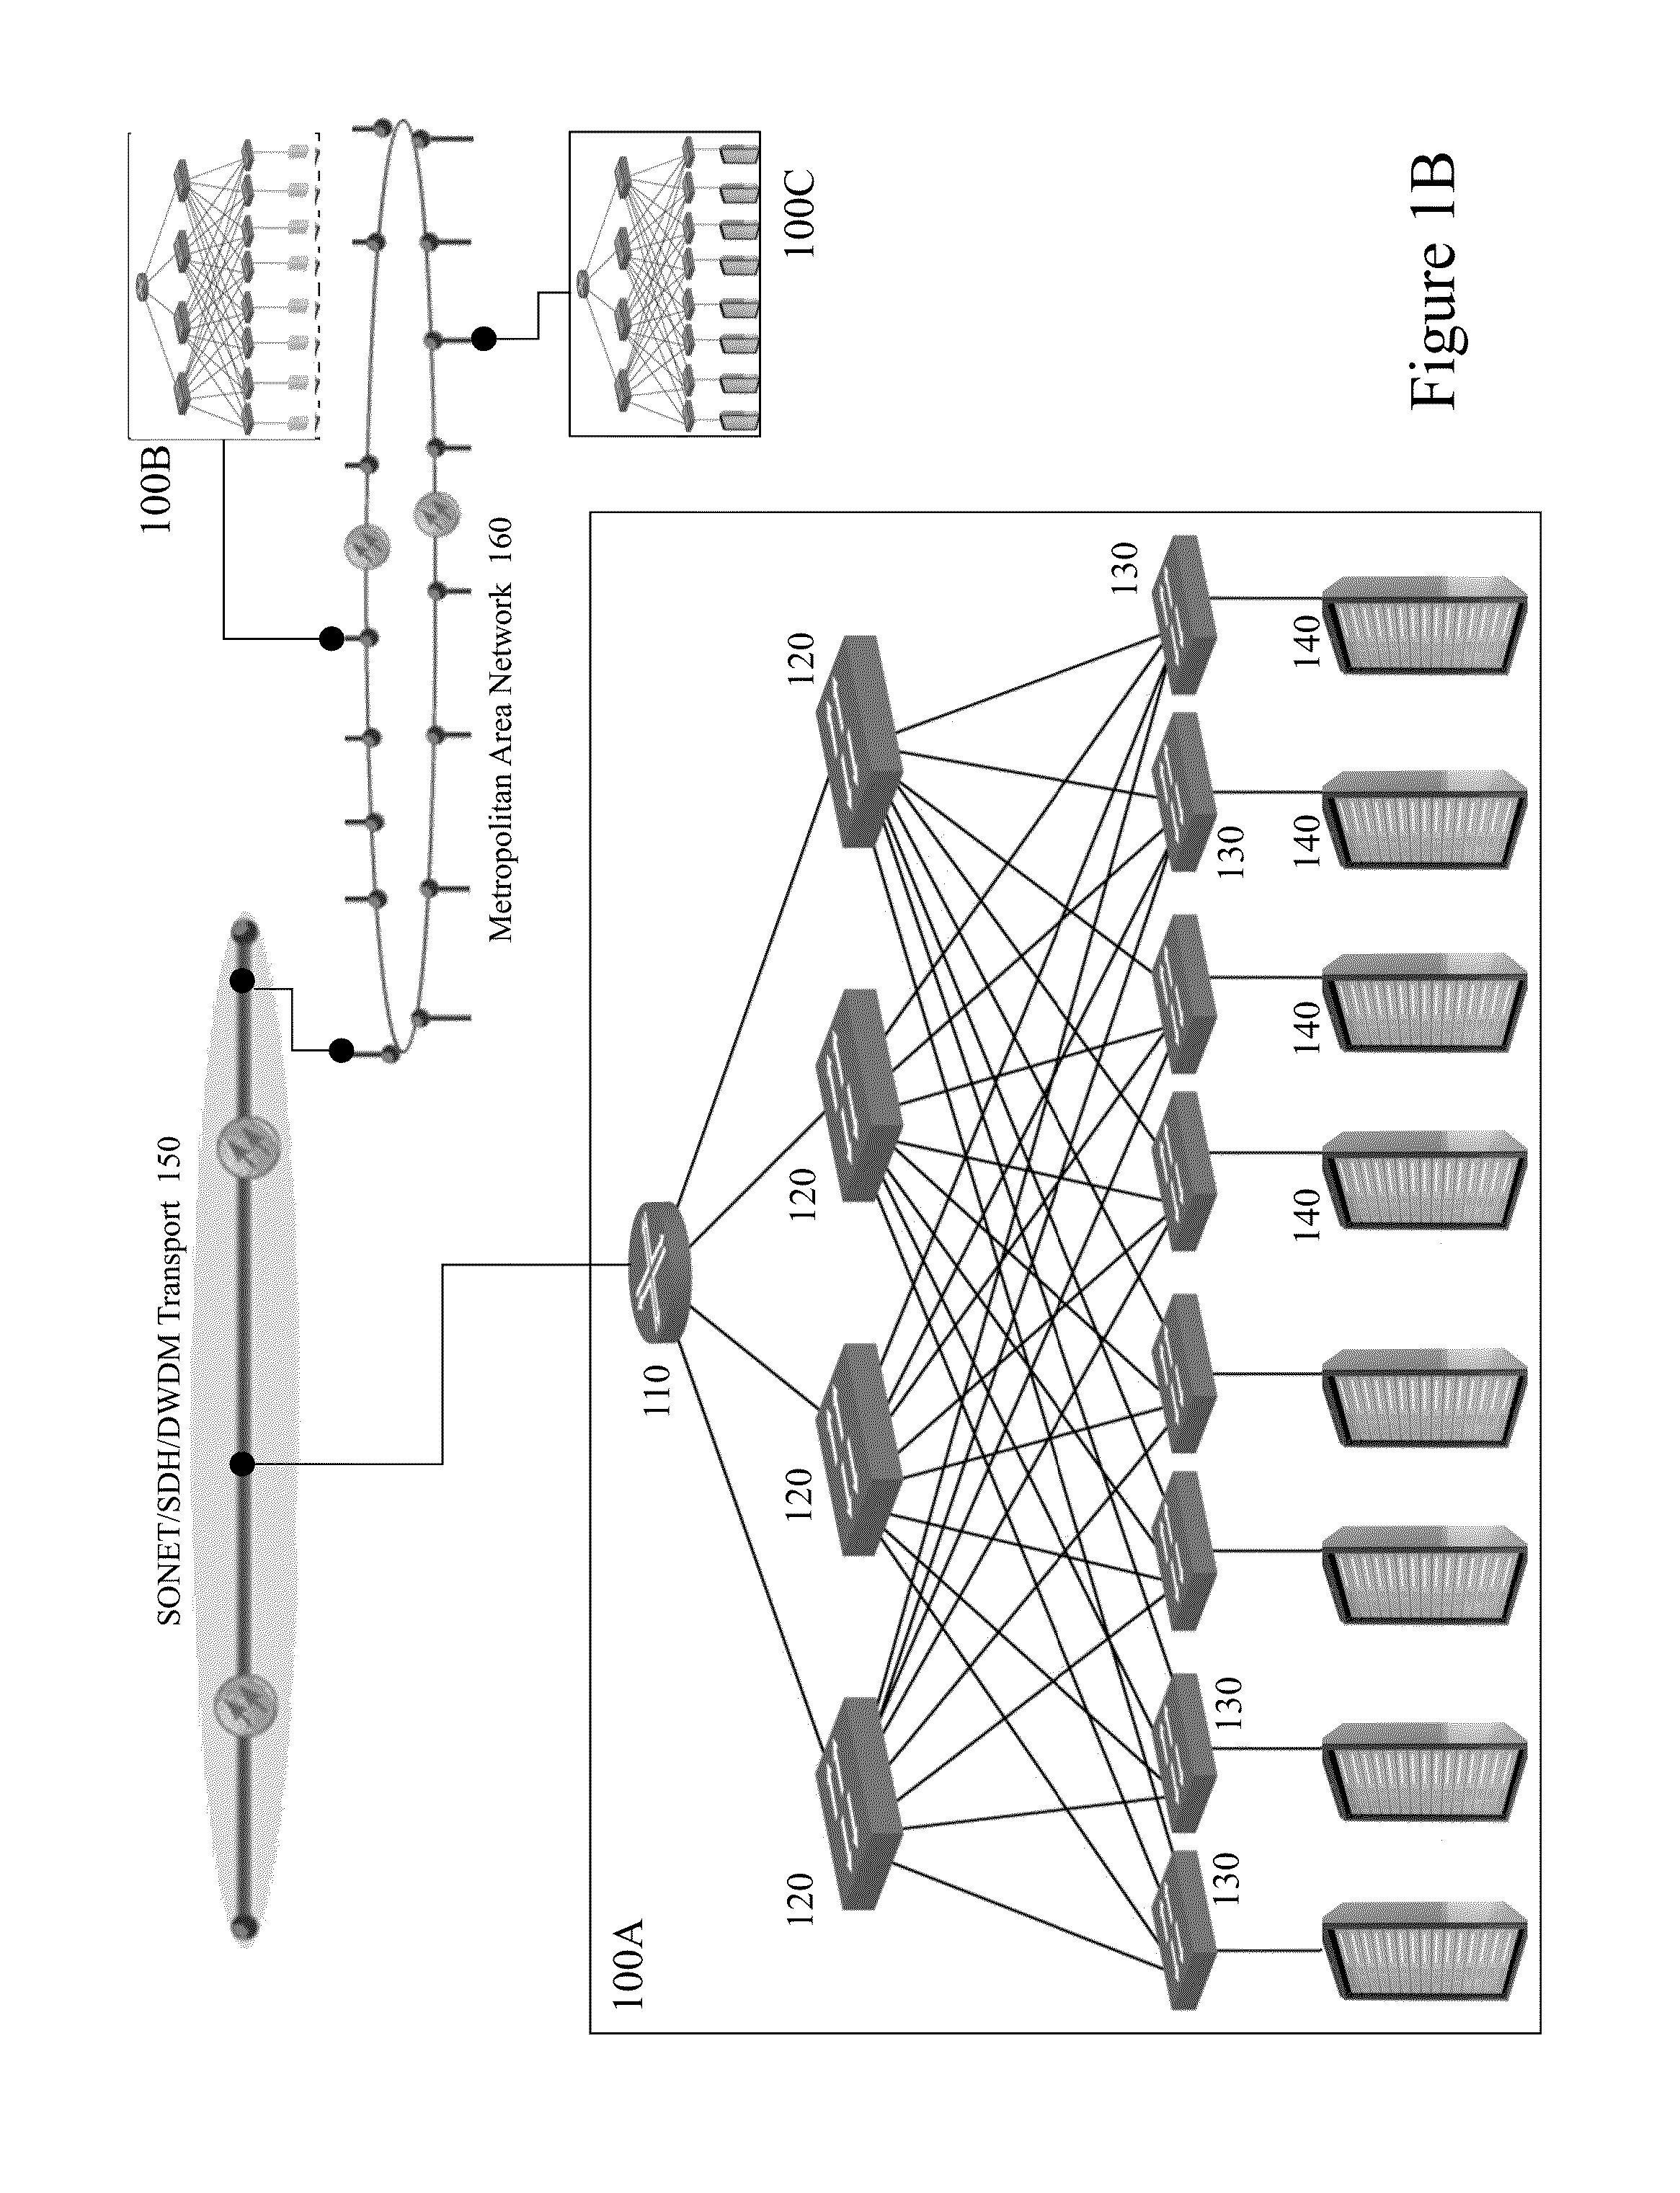 Optical interconnection methods and systems exploiting mode multiplexing